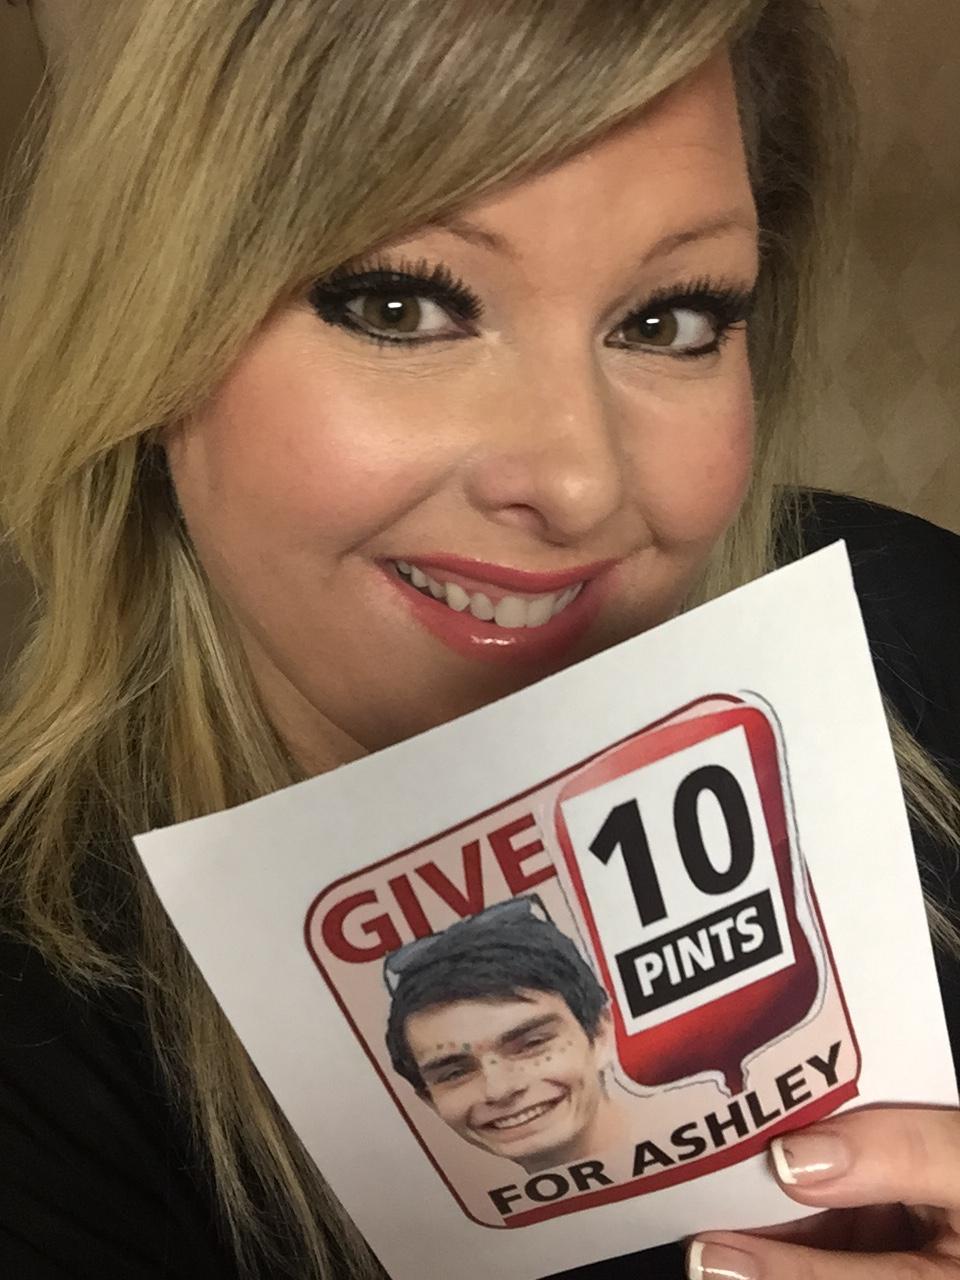 A friend of the family, Kimberly Rivet from Baton Rouge, in Louisiana, USA, also donated blood yesterday. She said: "Ashley has such a beautiful family. It's so amazing to see them and all of the donors keep his spirit alive through helping so many others